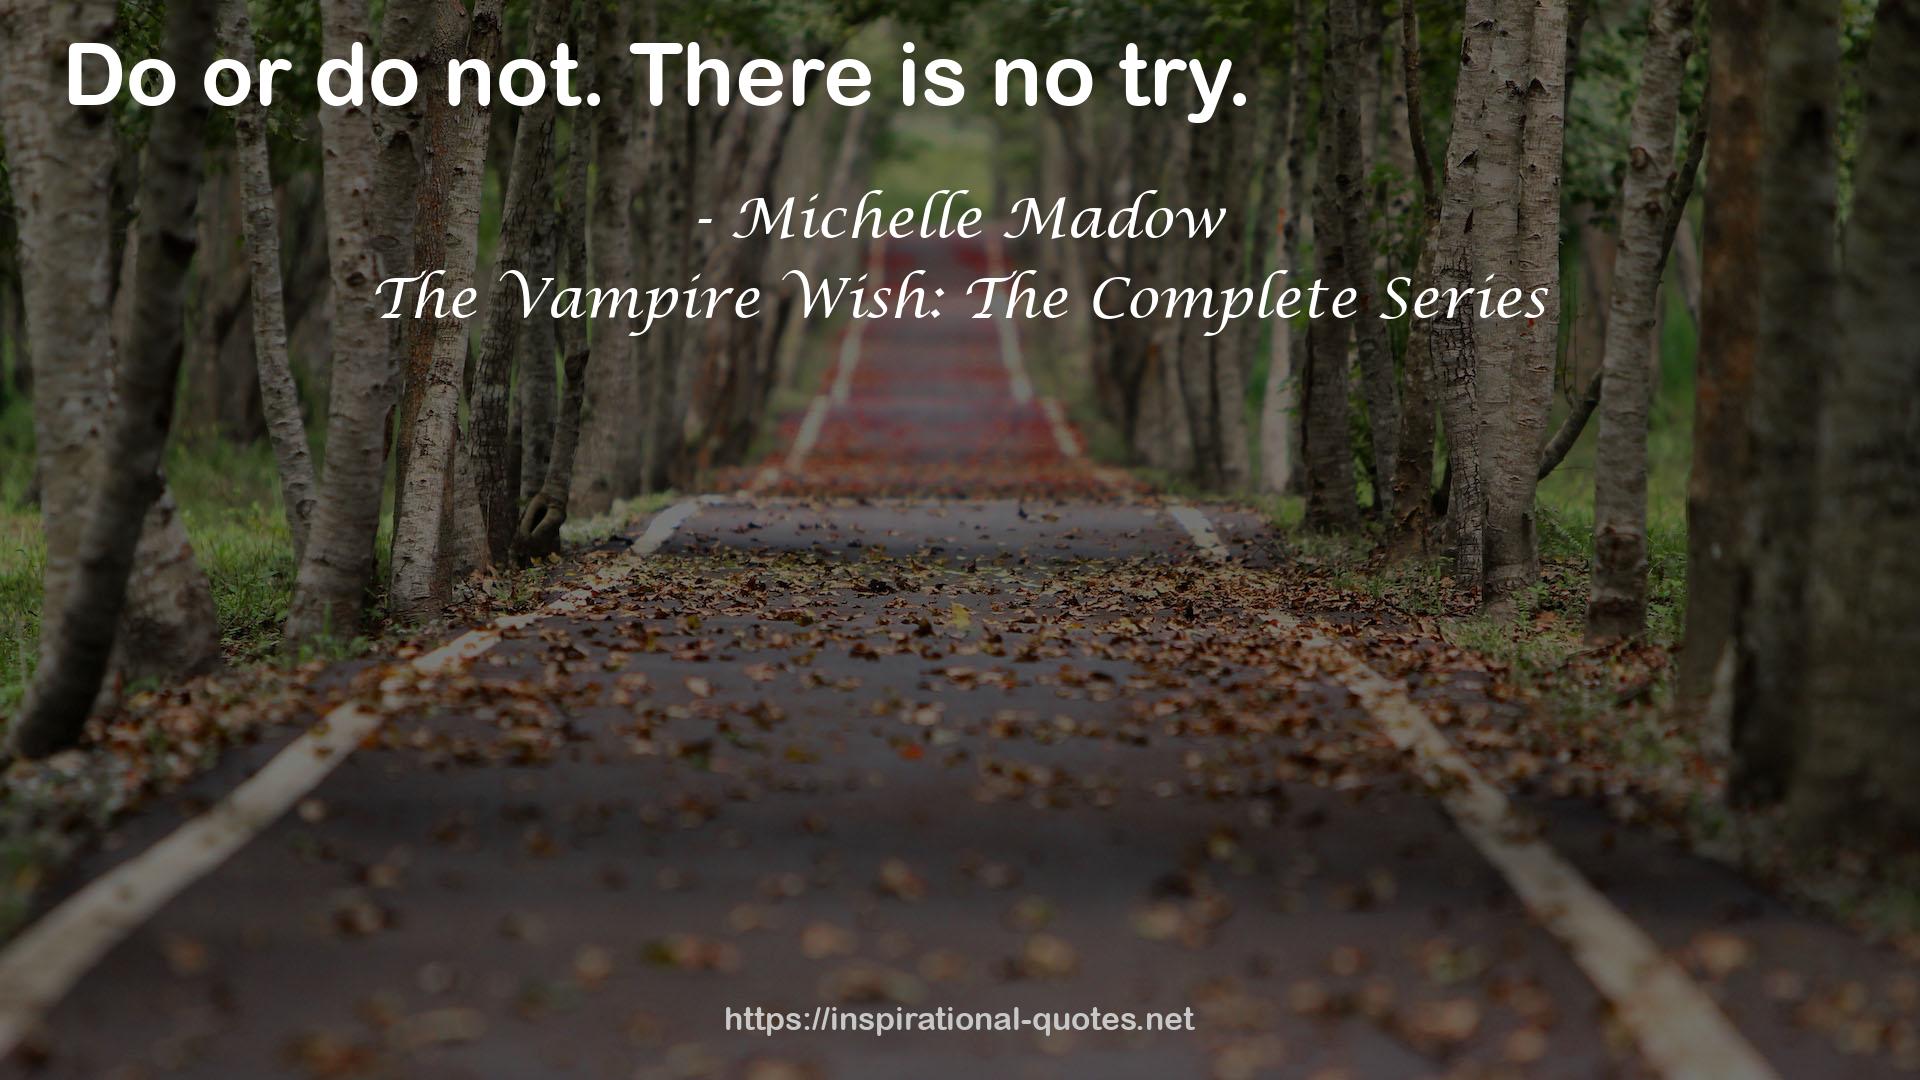 The Vampire Wish: The Complete Series QUOTES